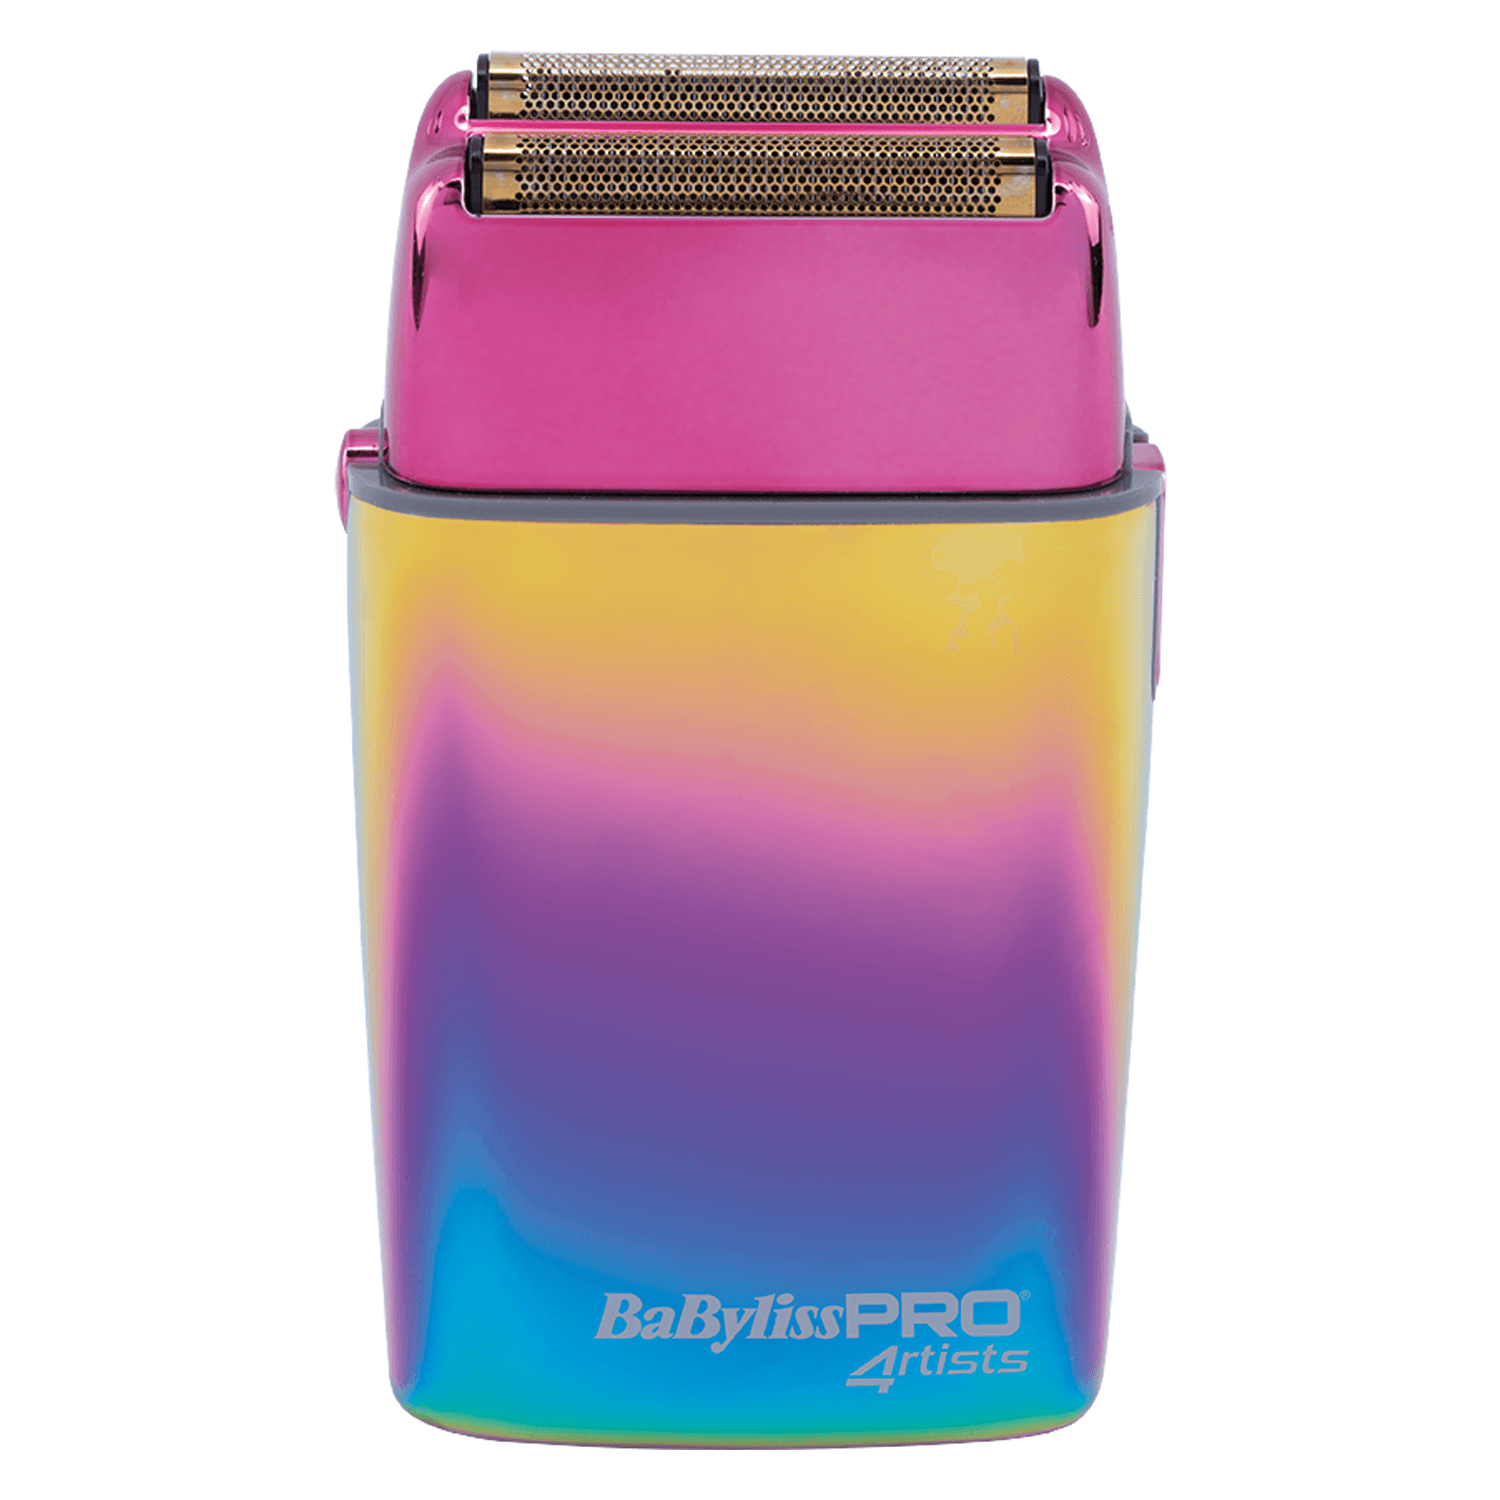 Product image from BaByliss Pro - Professionelle Doppel Folienrasierer Chaméléon 4Artists